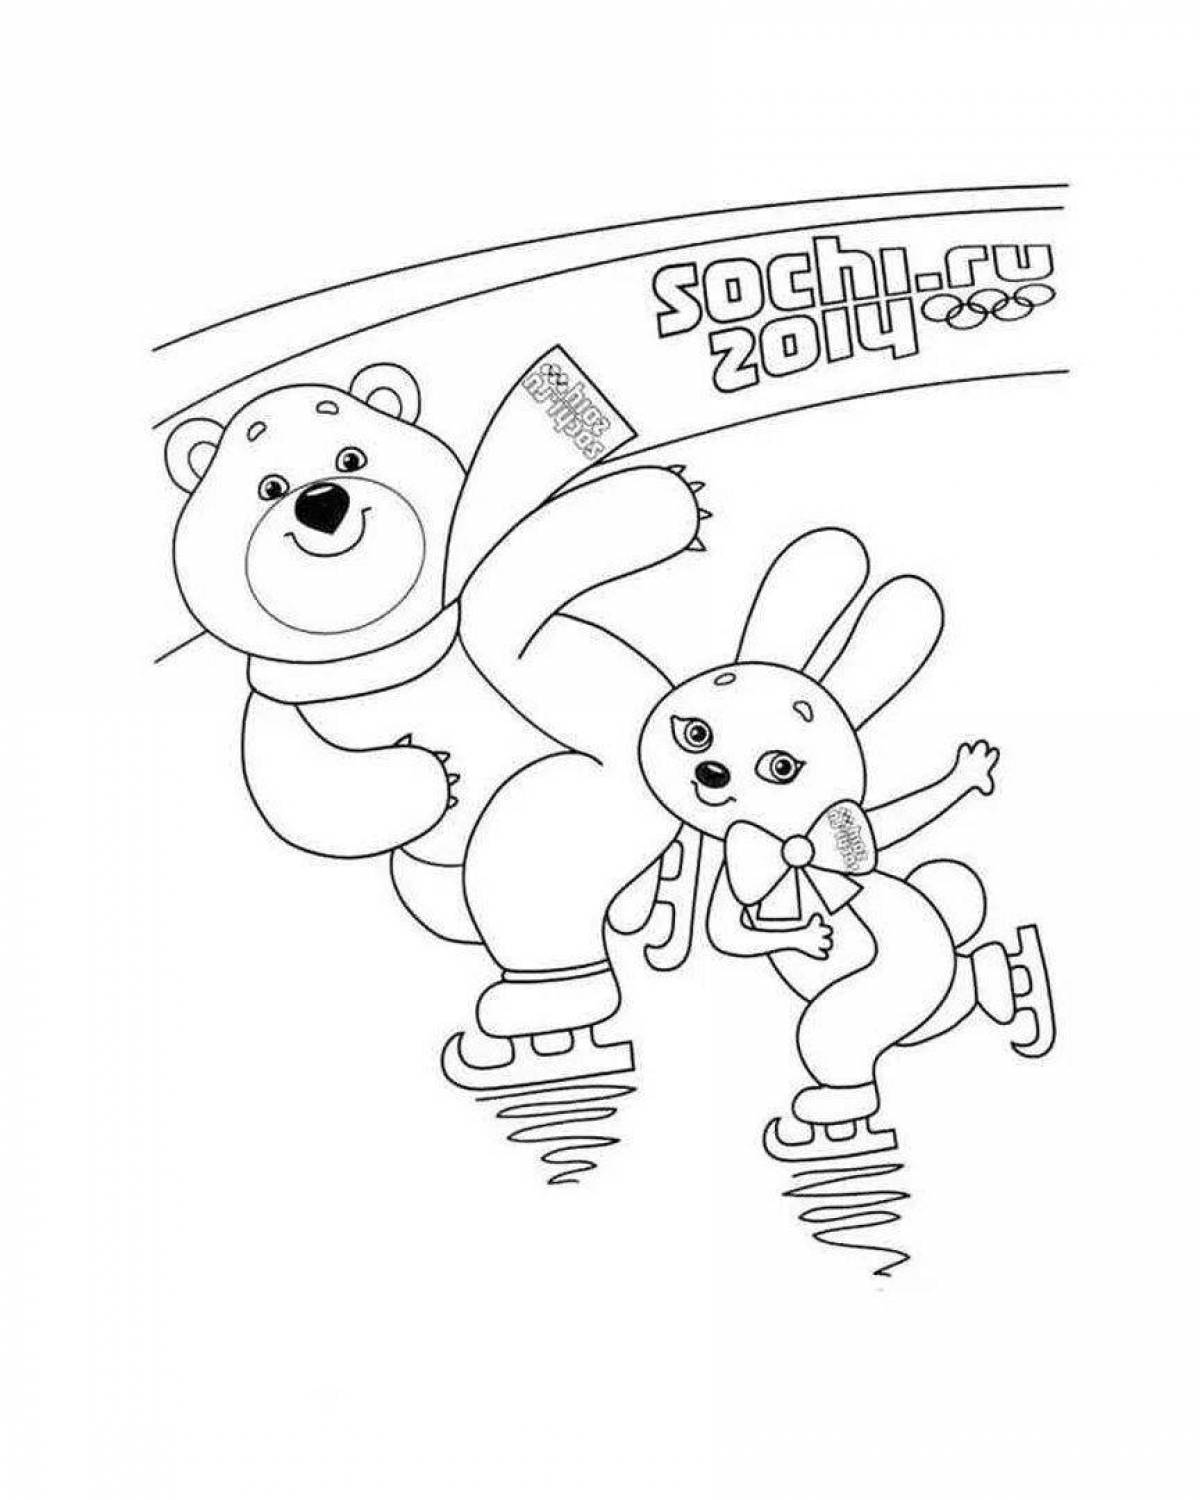 Fascinating winter olympic coloring book